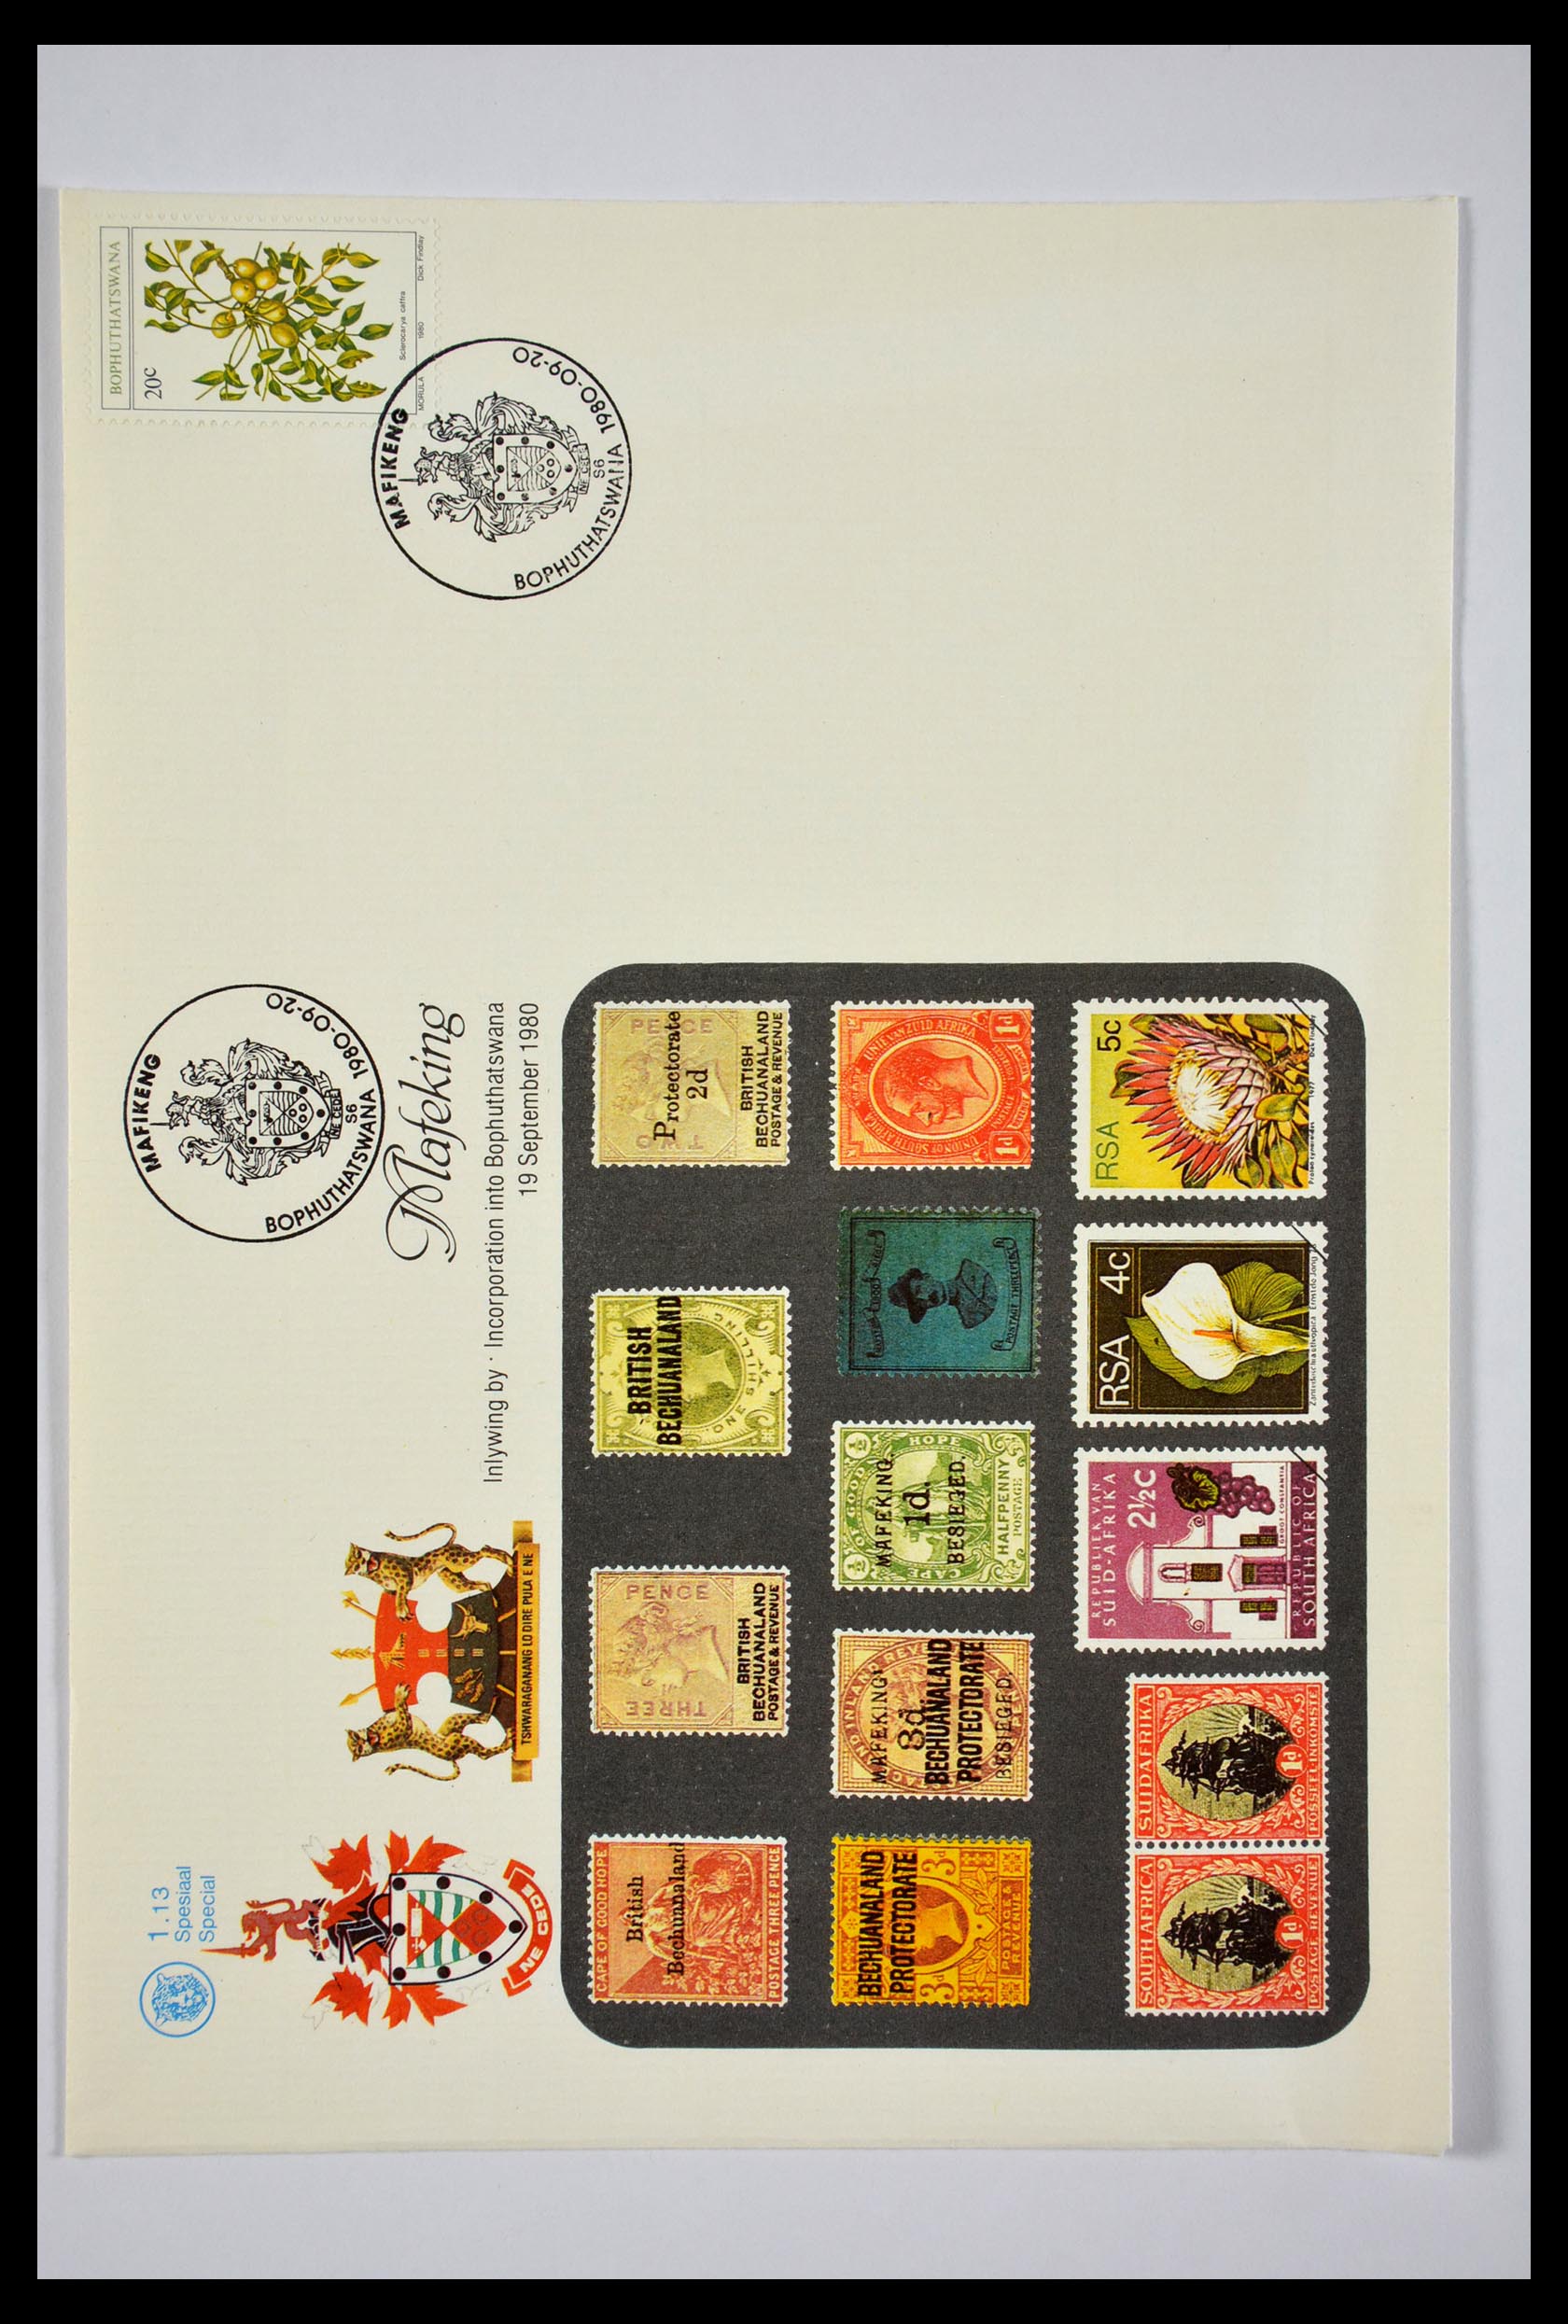 29356 089 - 29356 South Africa homelands first day covers 1979-1991.